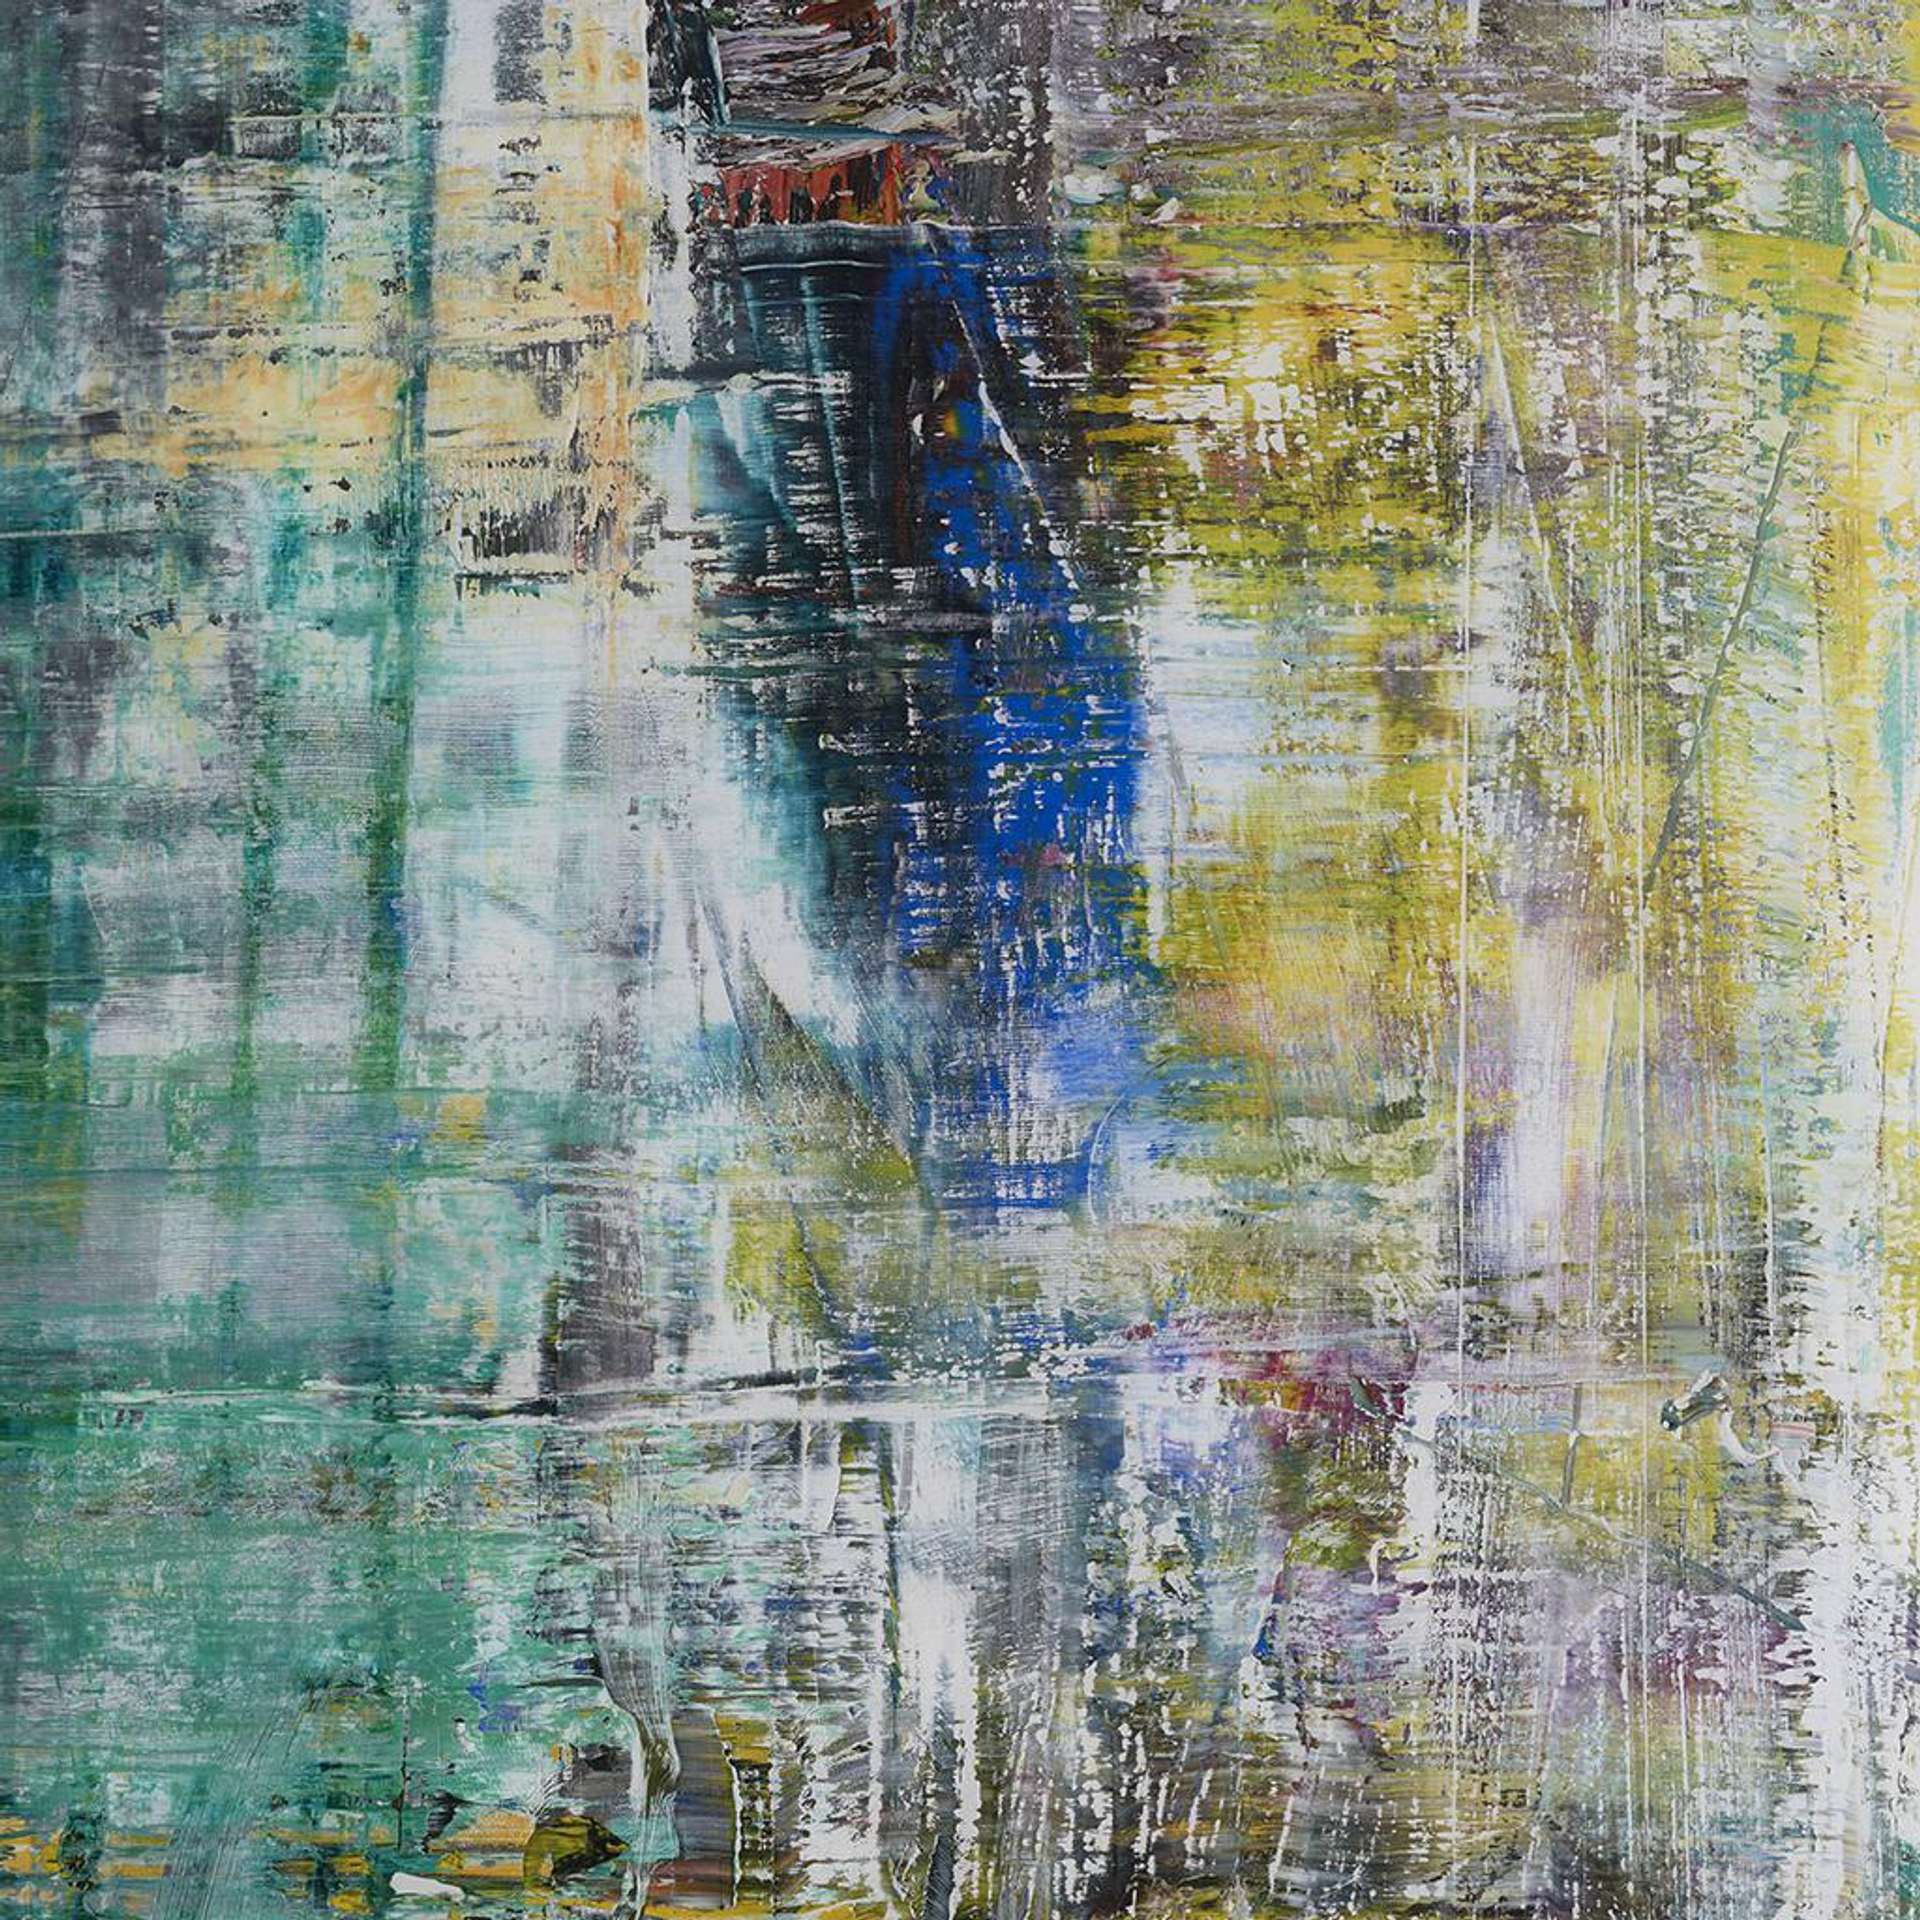 Wall-Sized Painting by Gerhard Richter Could Fetch $30 Million at Auction